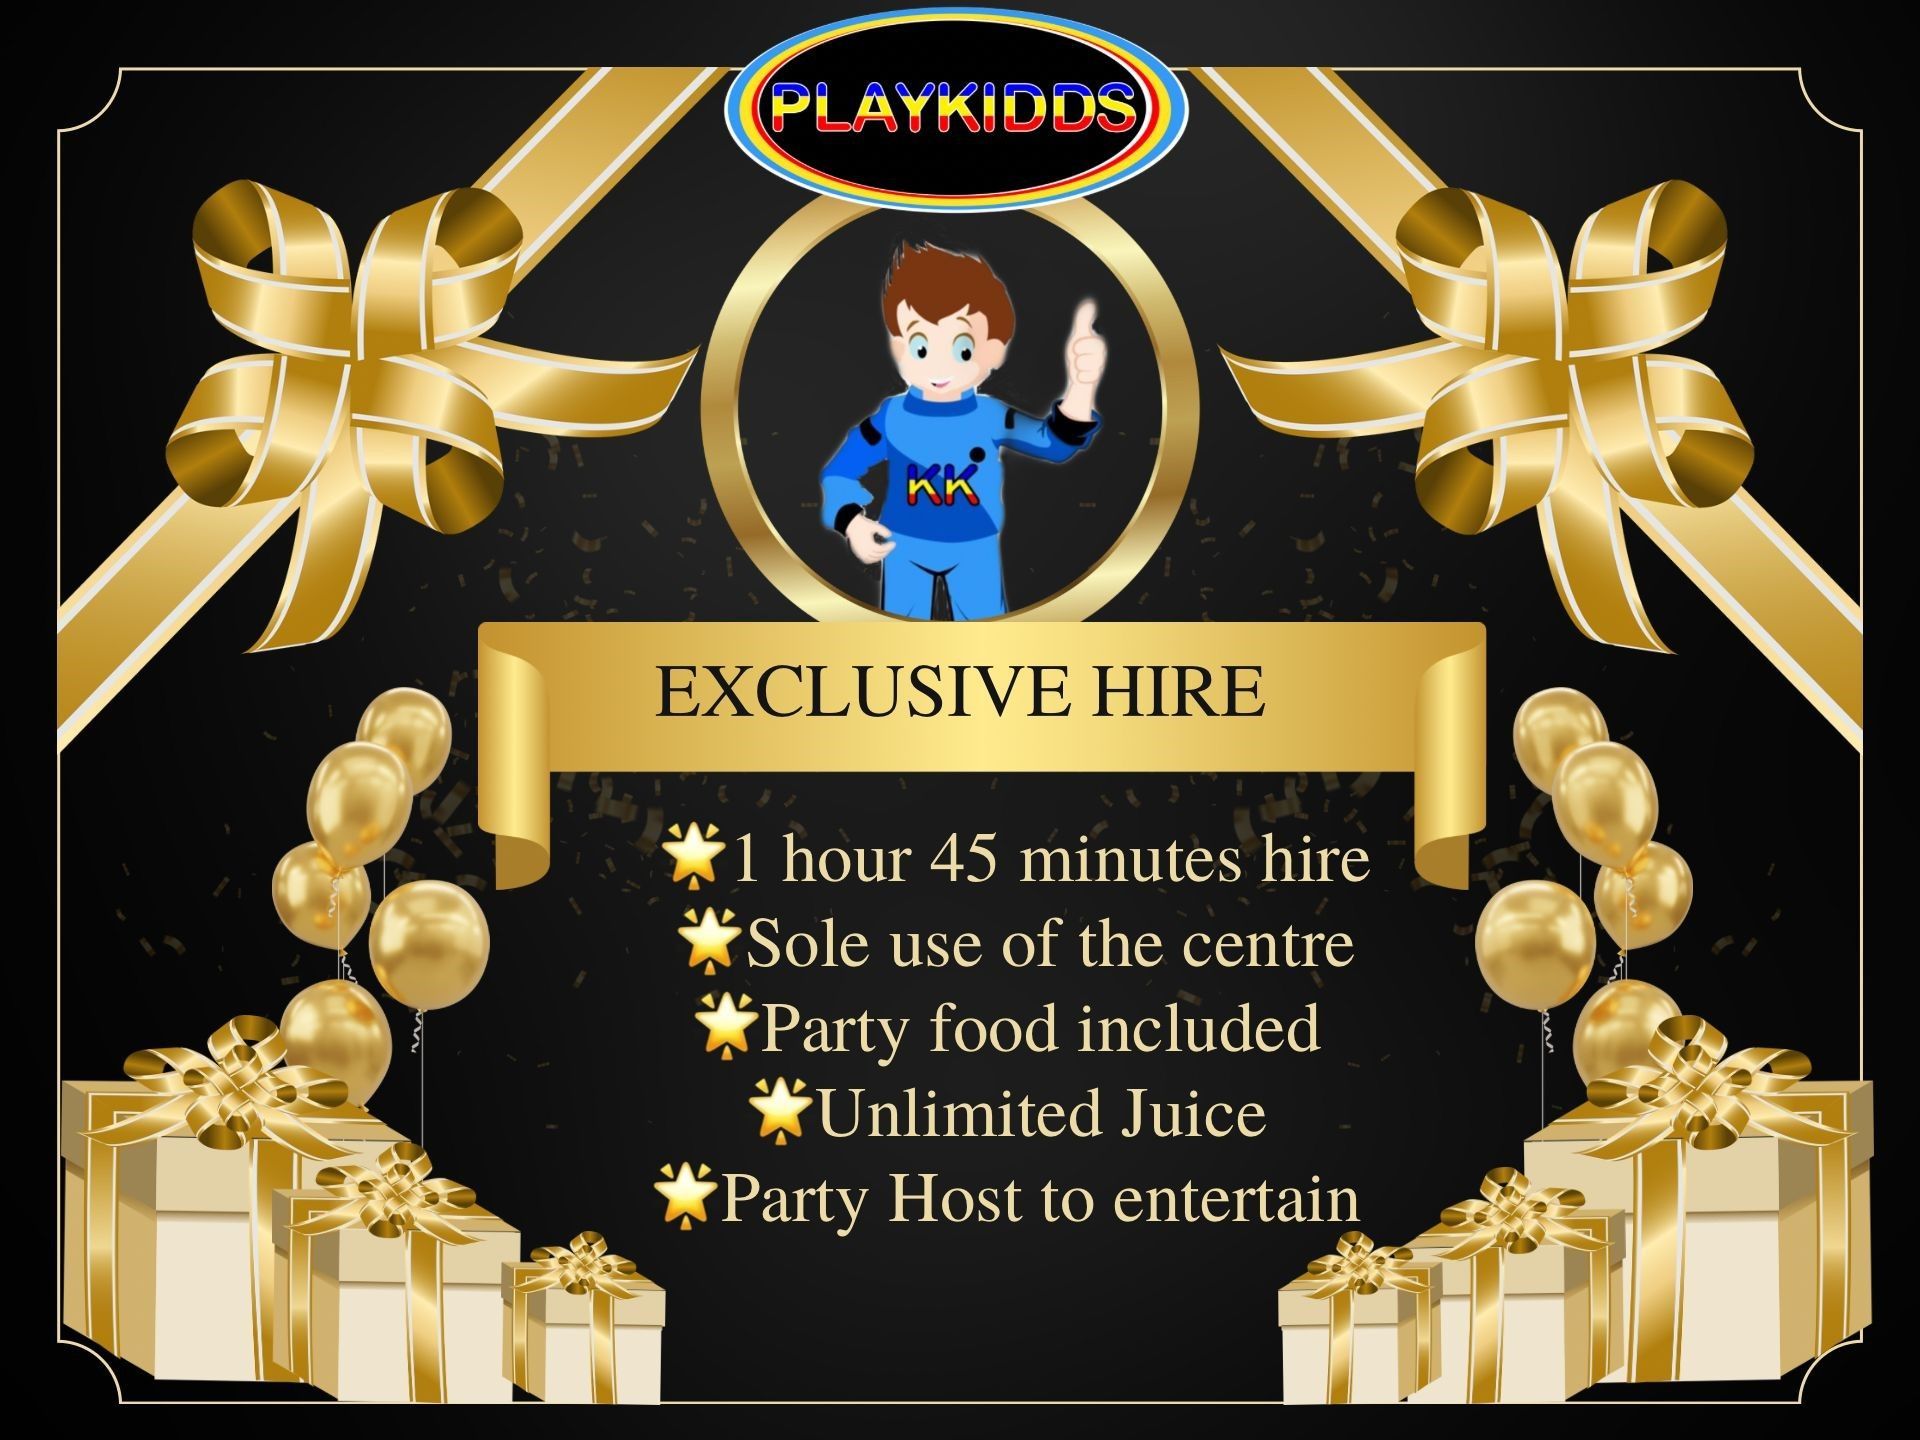 Exclusive Hire Party packages at Playkidds in Swinton